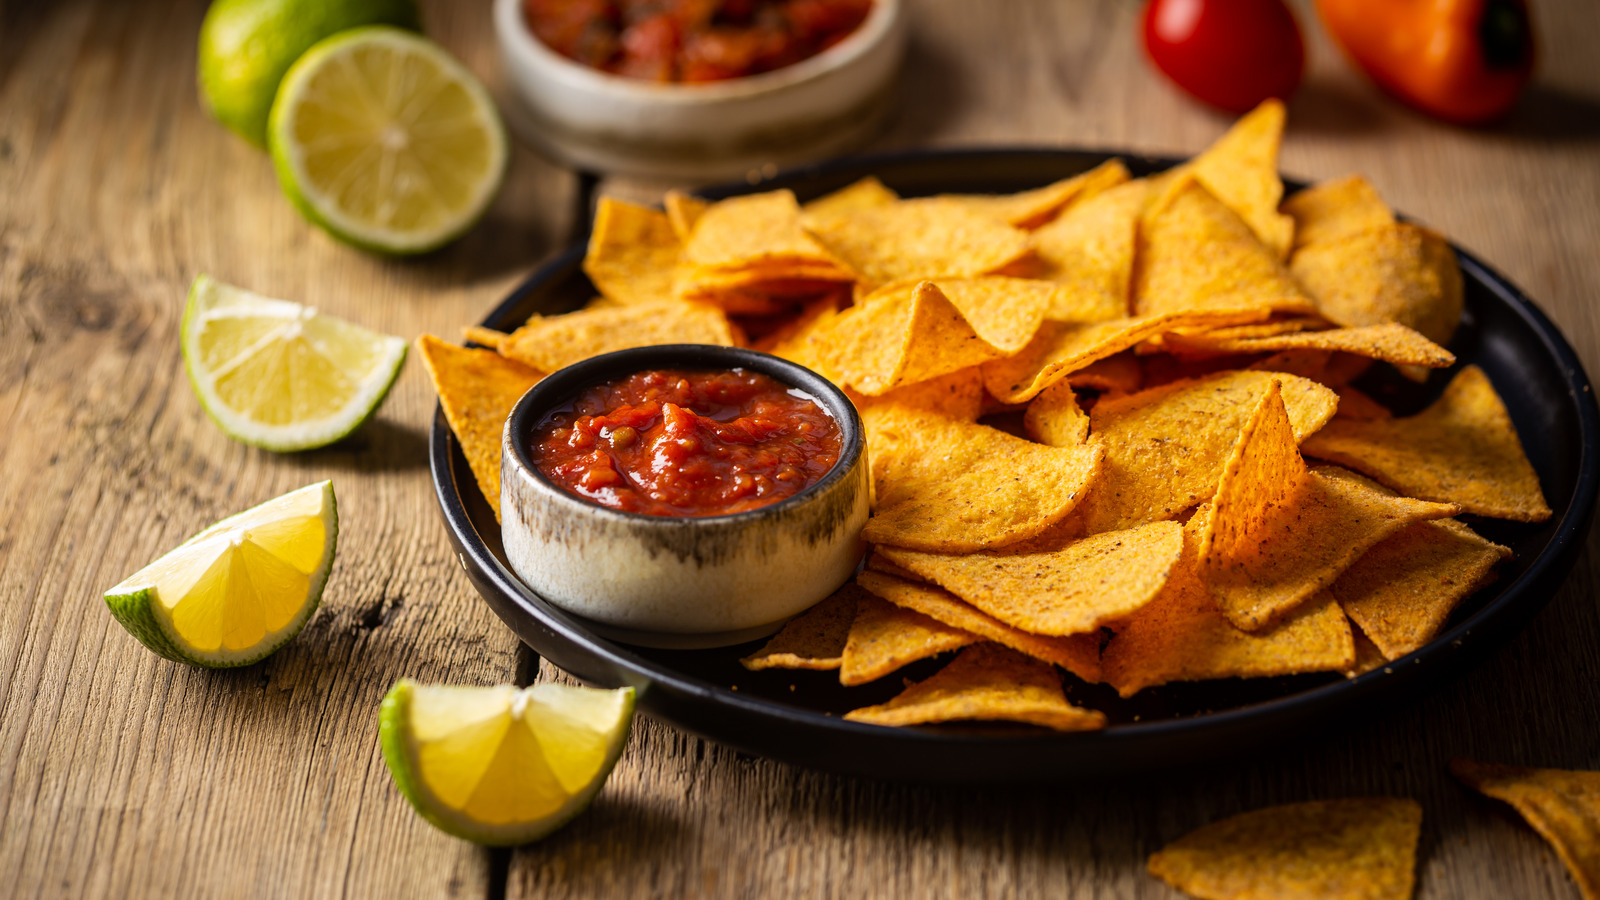 Use This Trick To Revive Stale Tortilla Chips - Tasting Table